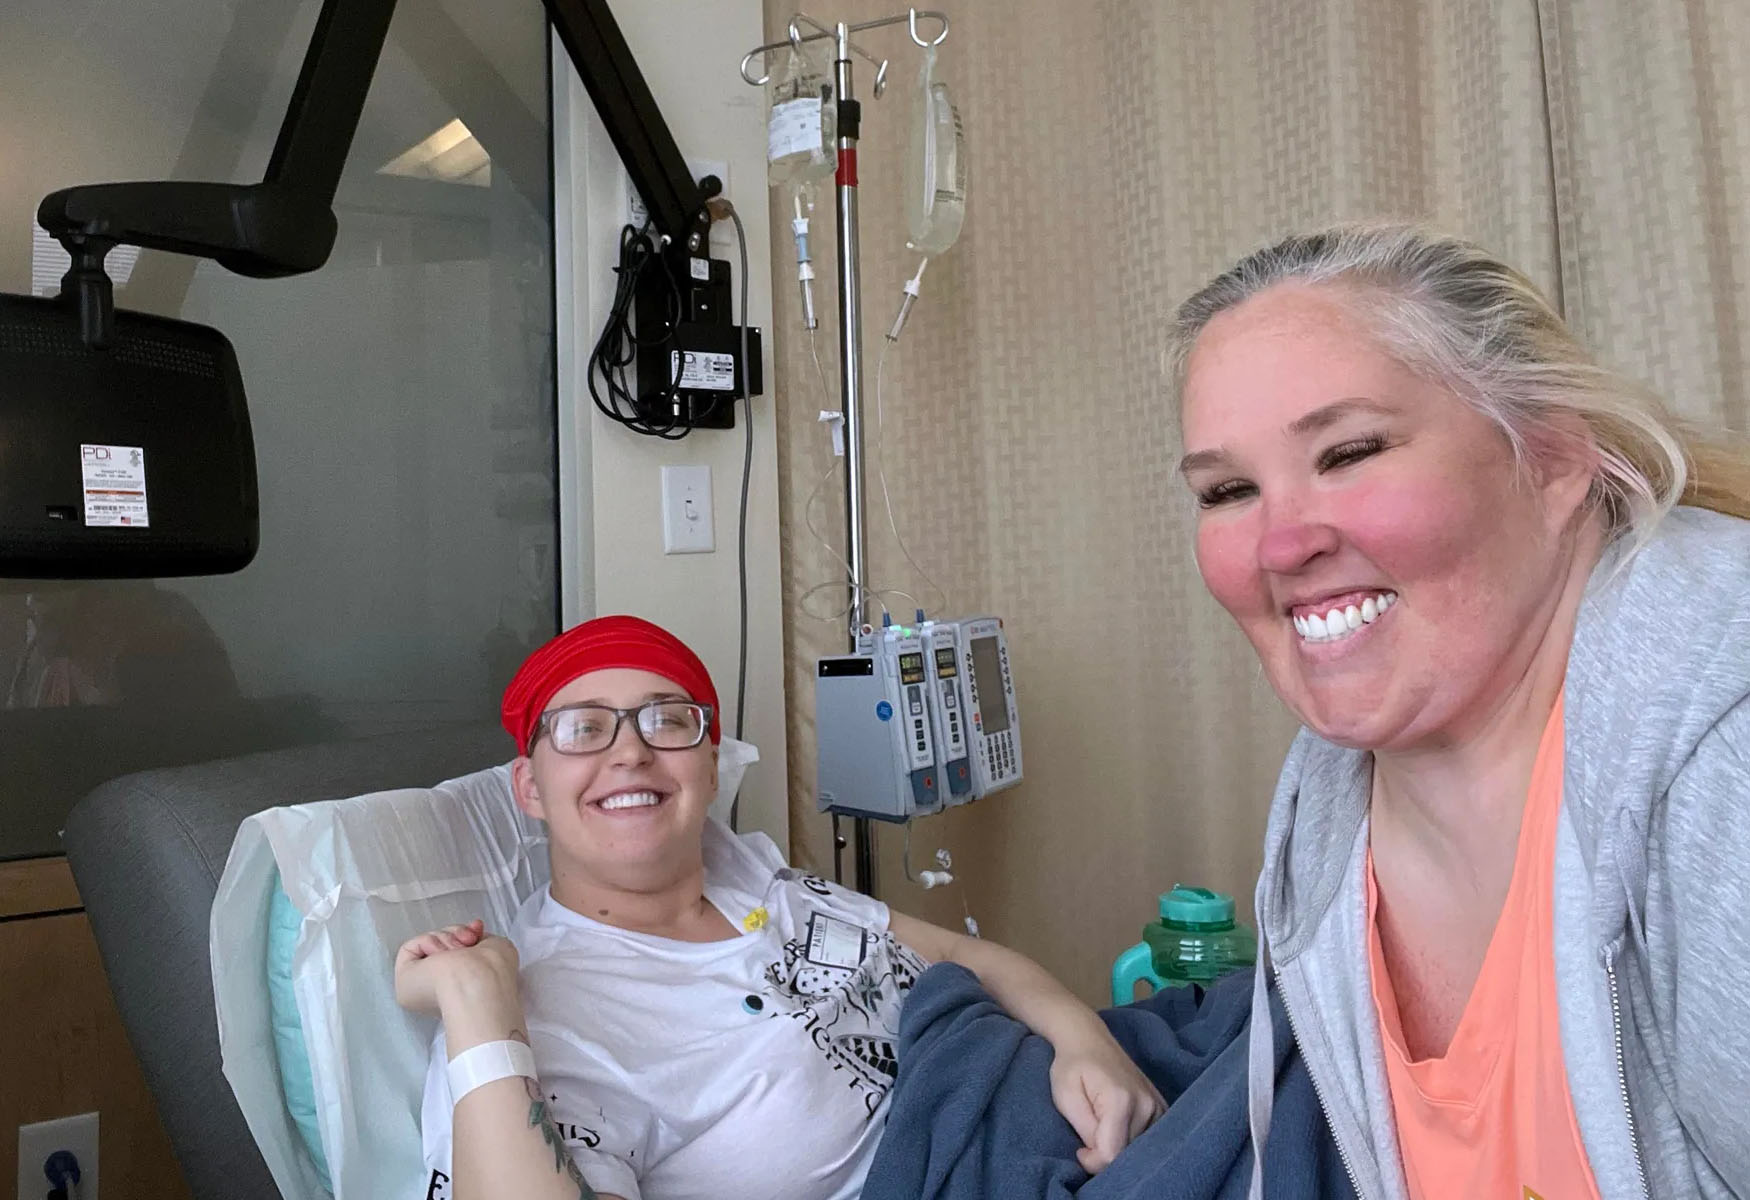 mama-june-shares-serious-update-on-daughters-cancer-battle